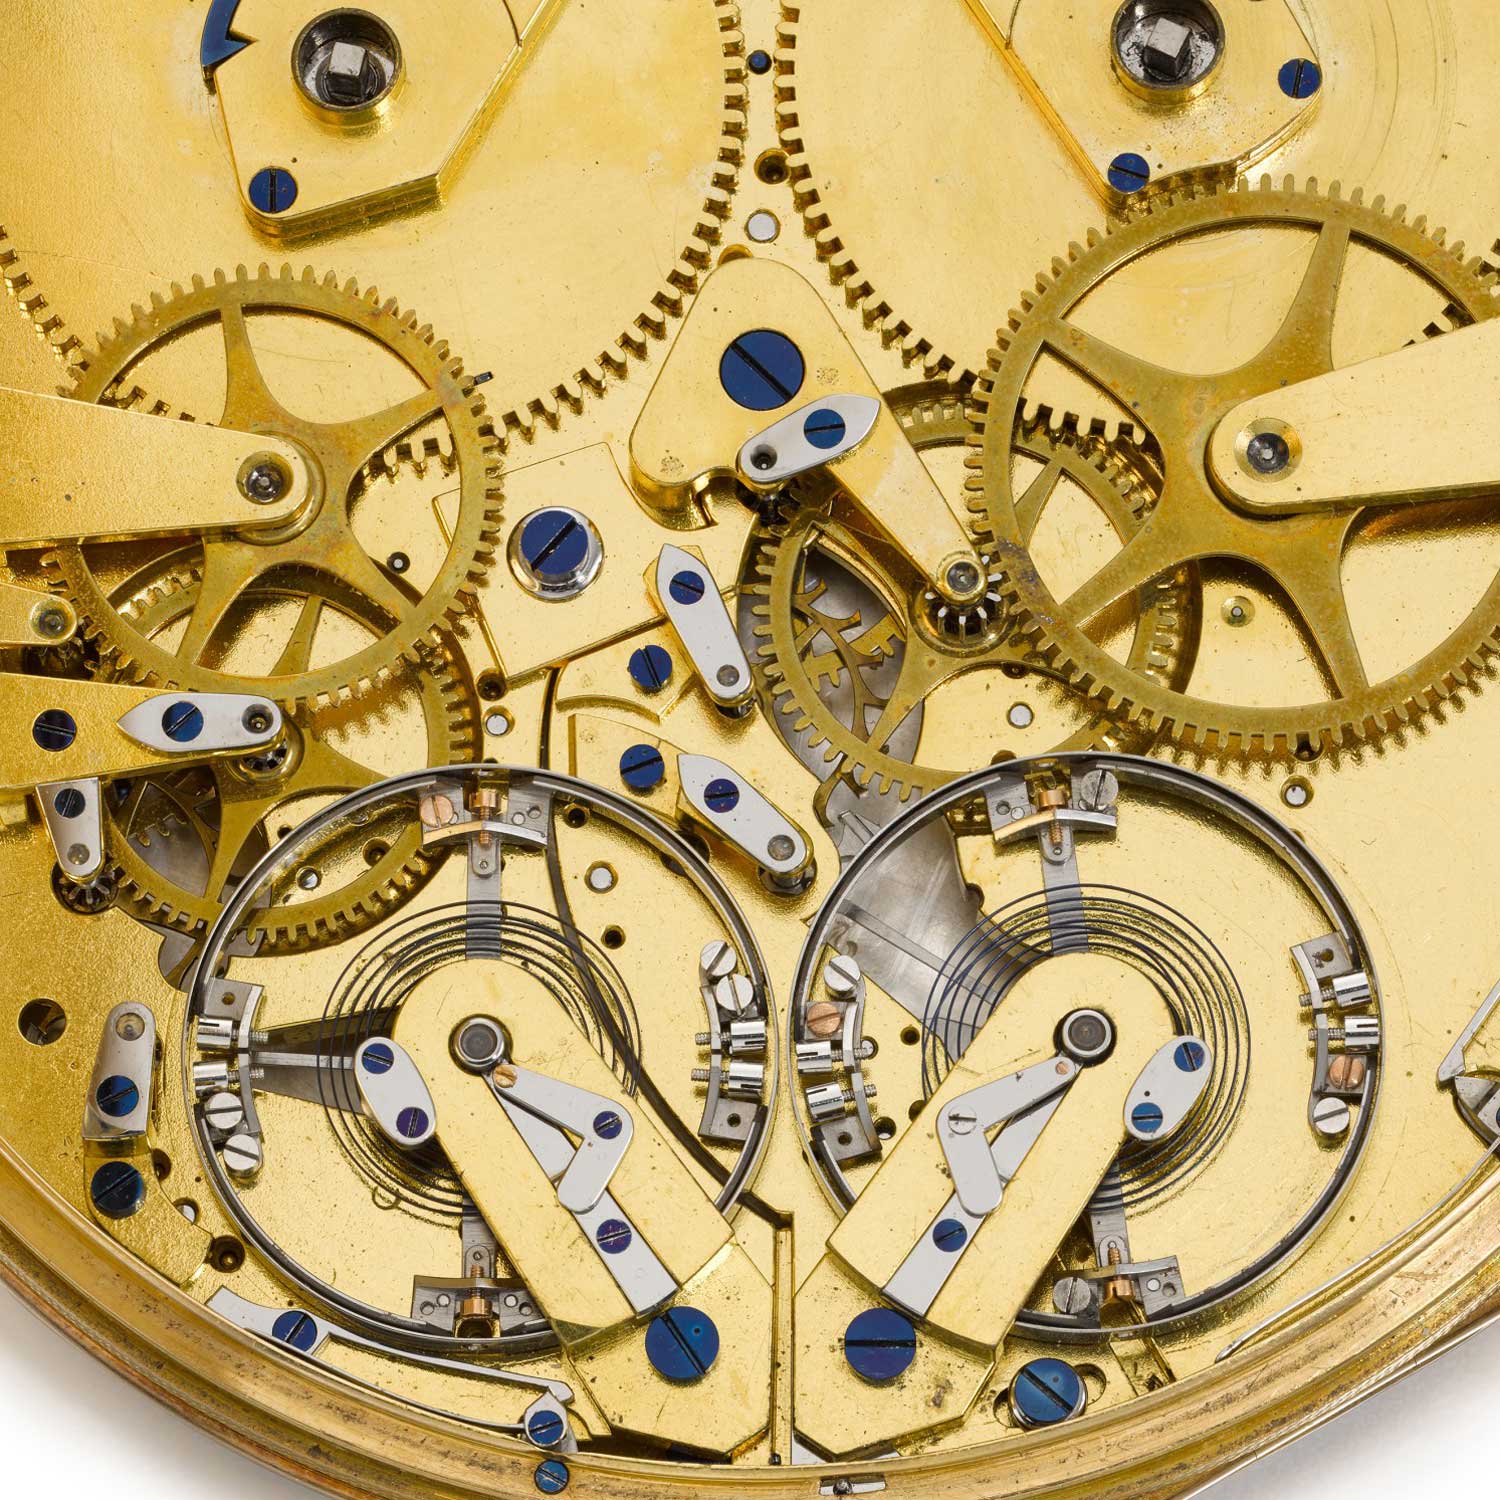 The Breguet Resonance Pocket Watch No. 2788 was acquired by the Prince Regent as a gift to his father, King George III, in 1818. (Image: Sotheby’s)